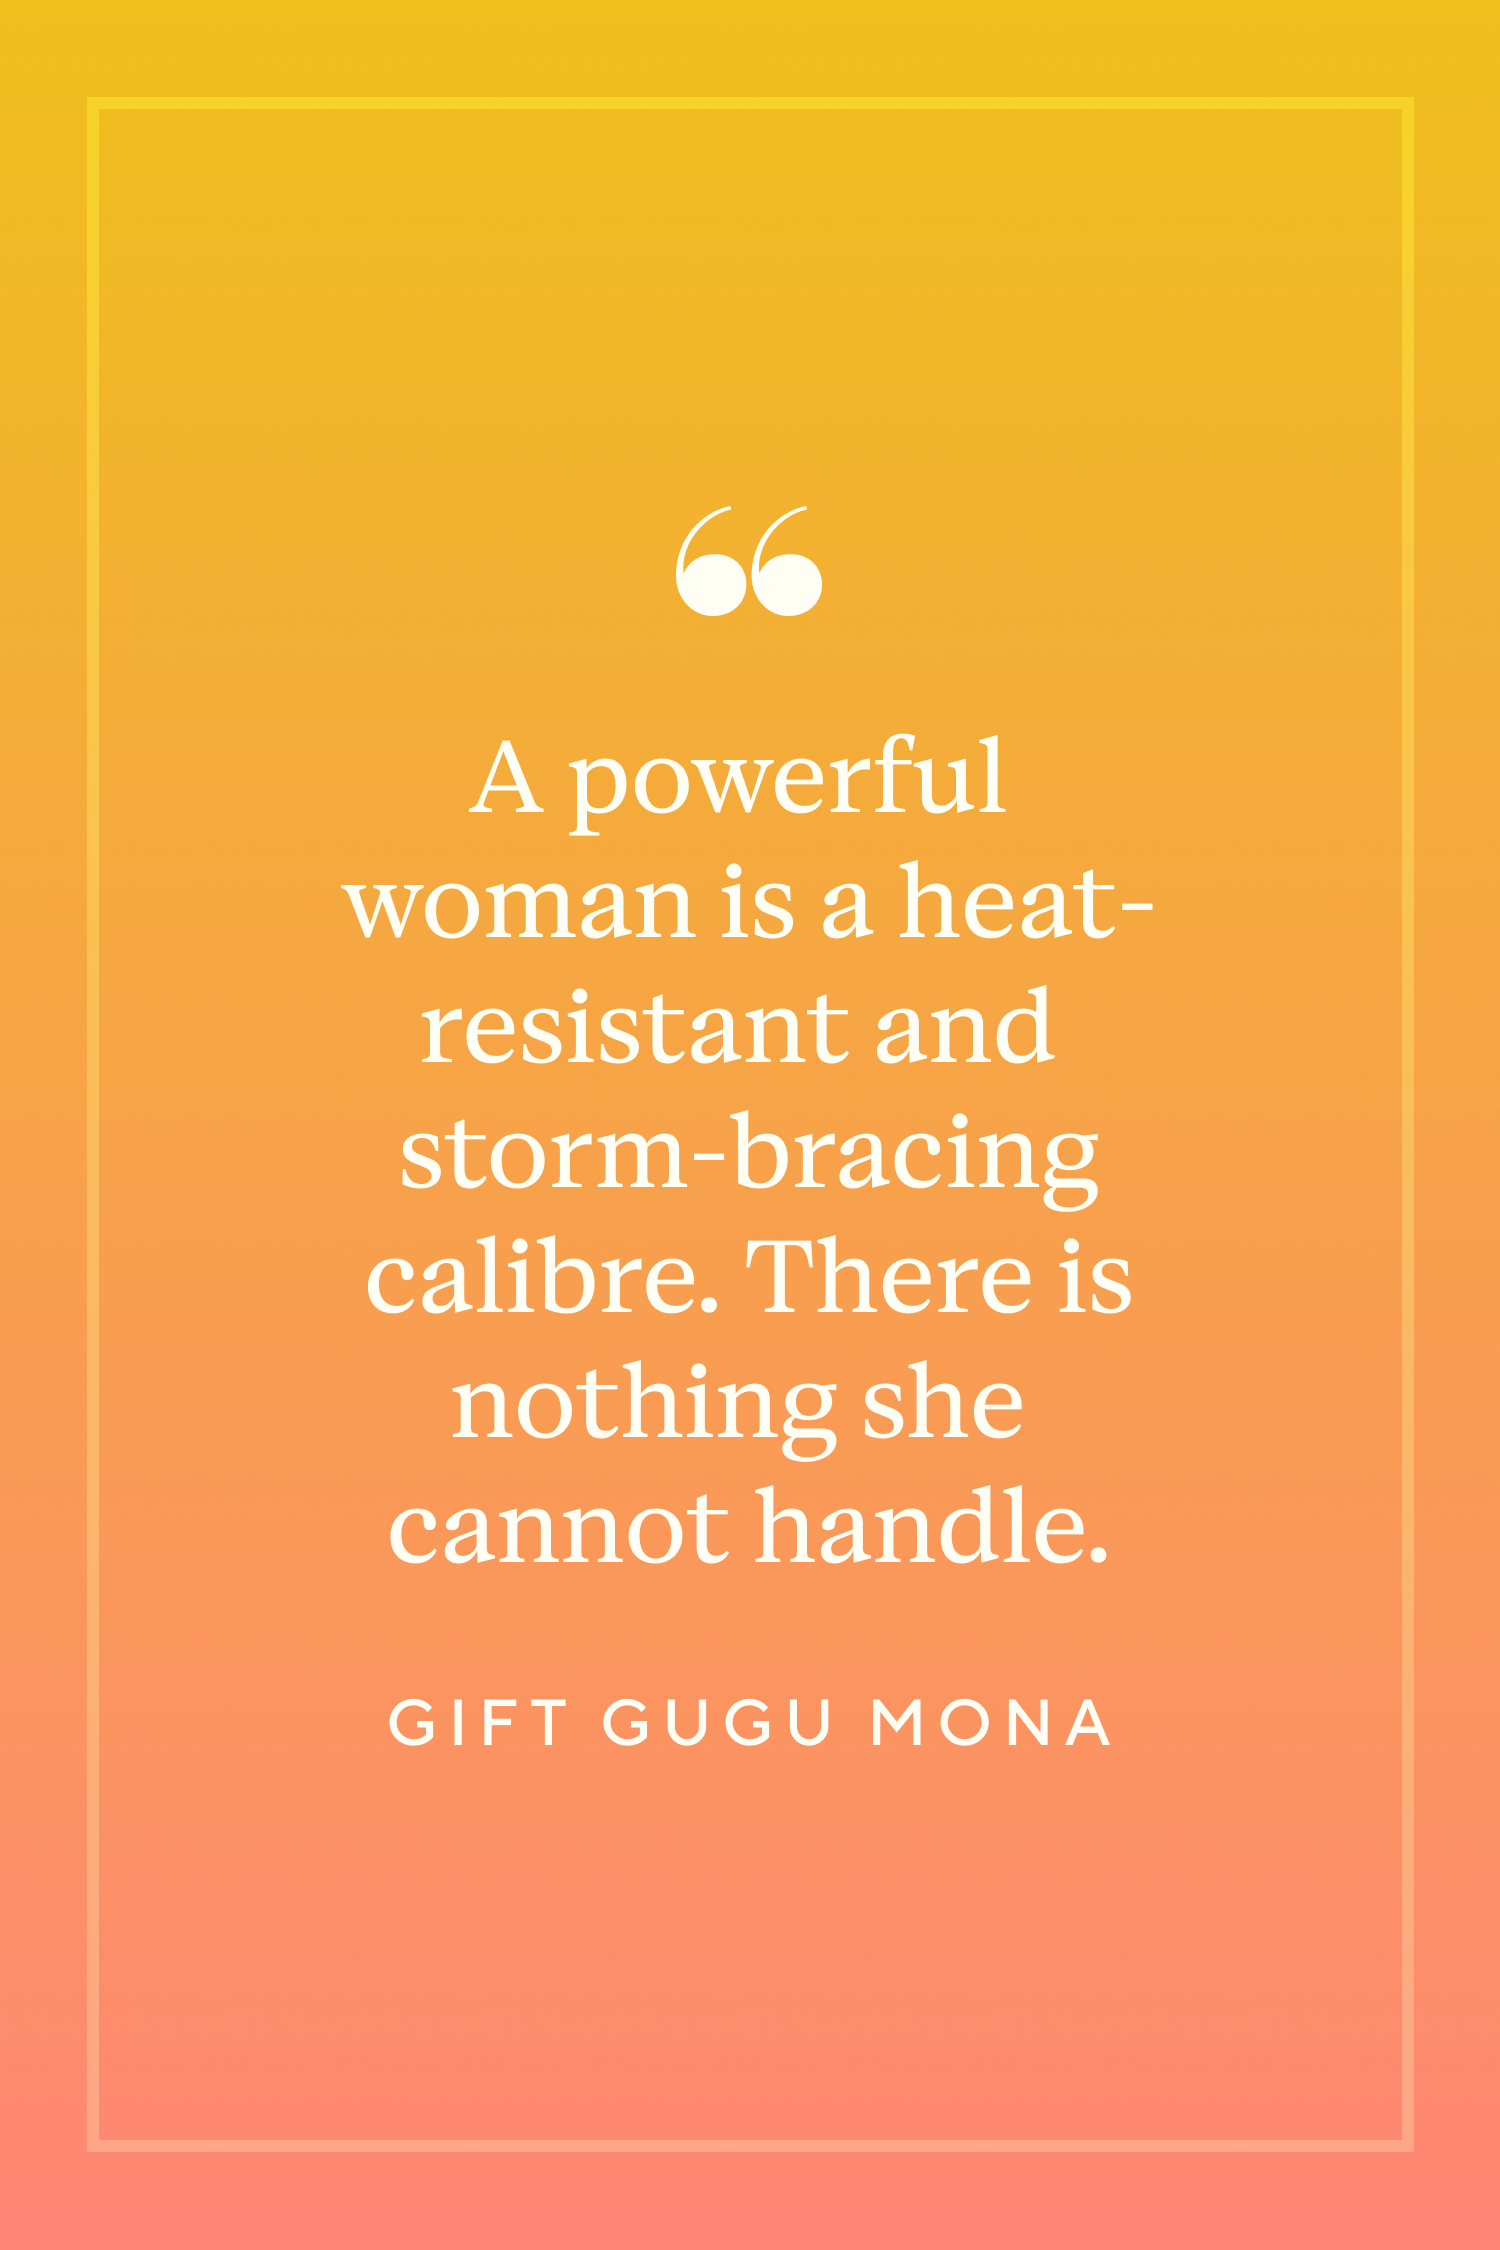 Top Women Empowerment Quotes From Strong Women - GlobalOwls